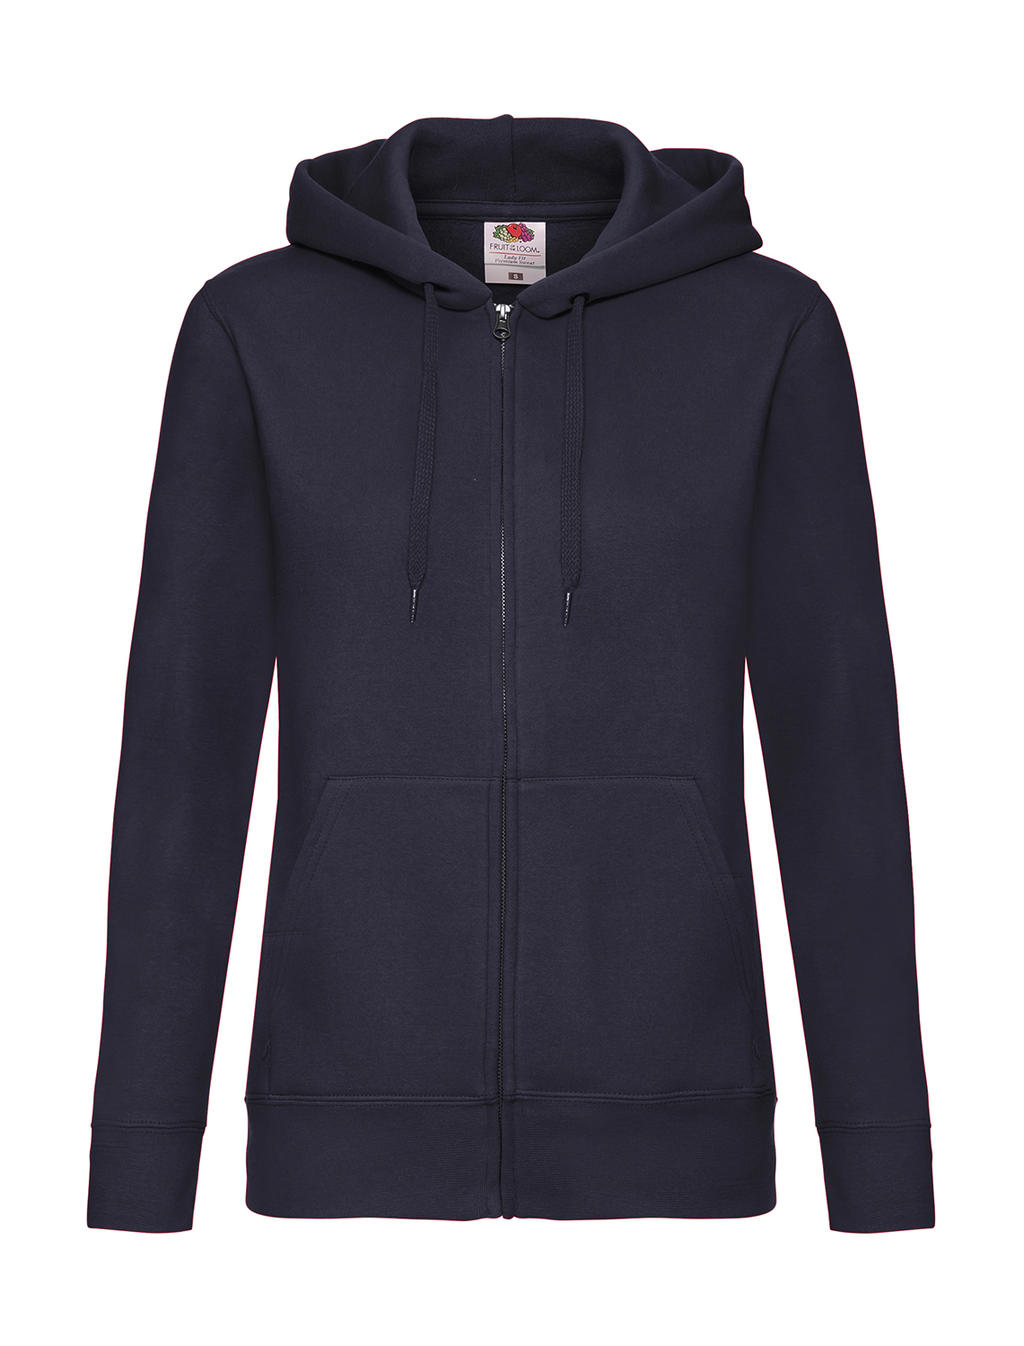  Premium Hooded Sweat Jacket Lady-Fit in Farbe Deep Navy